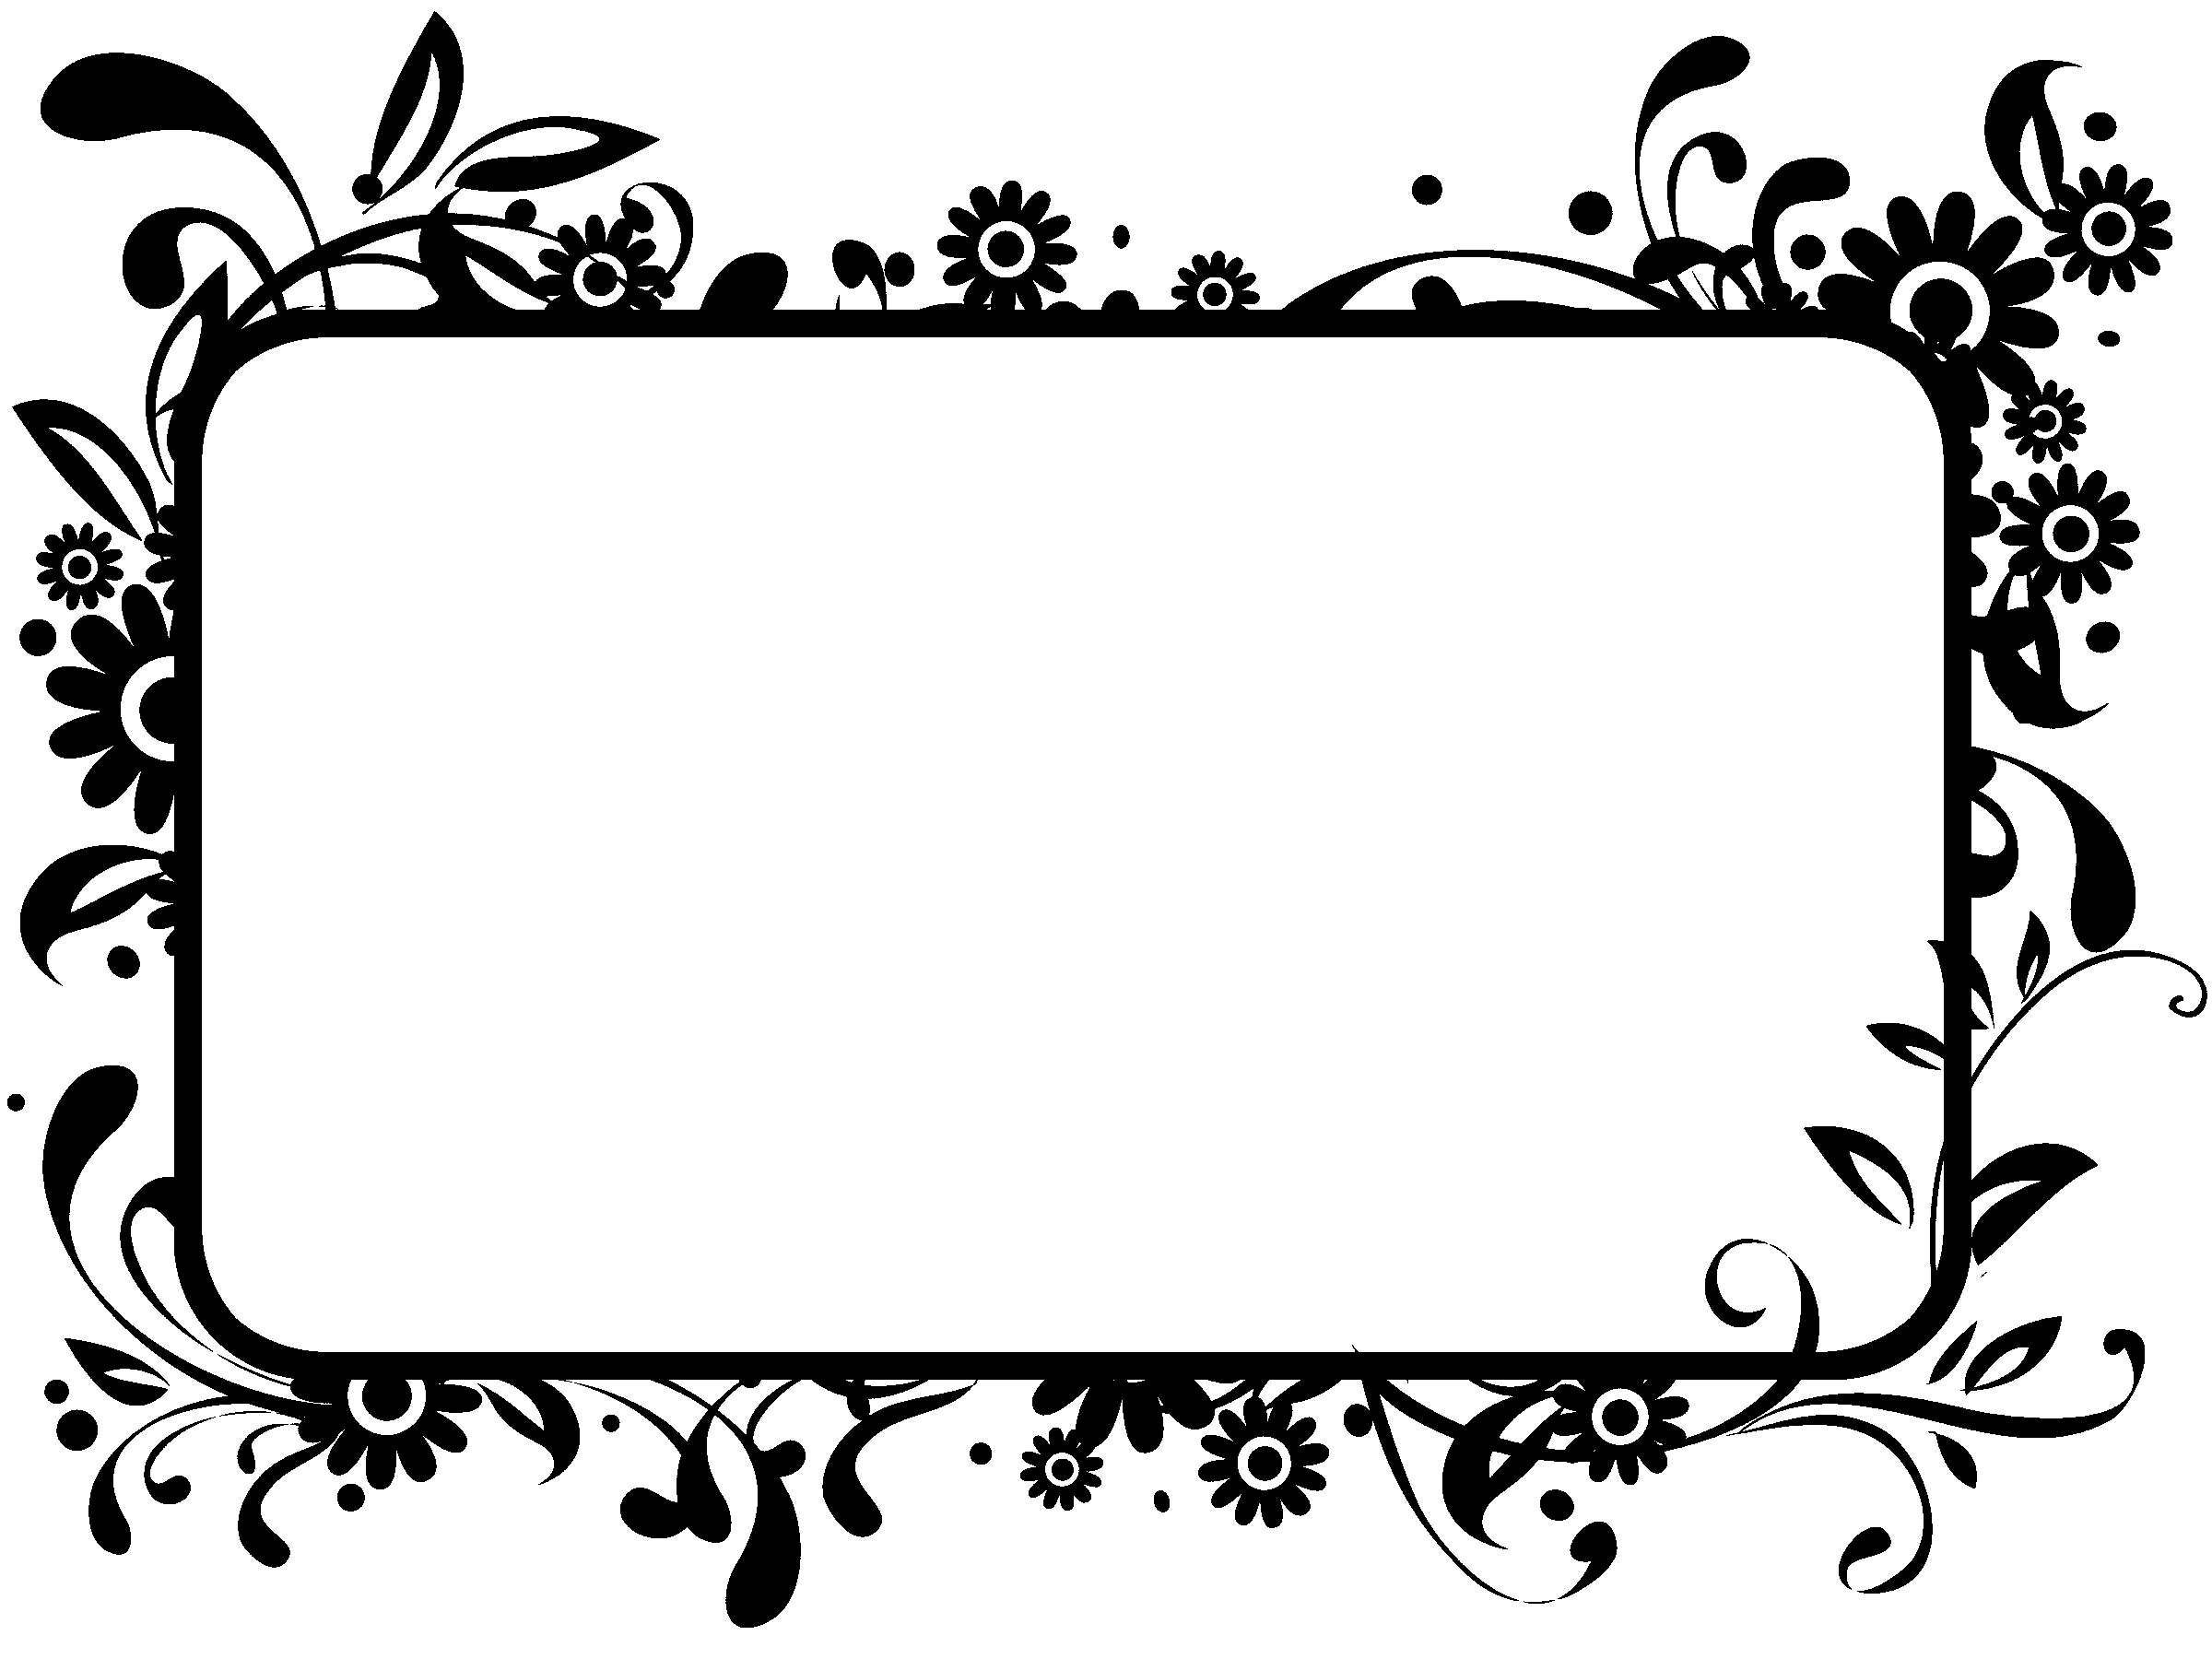 Free Flower Border Clipart Black And White, Download Free Clip Art